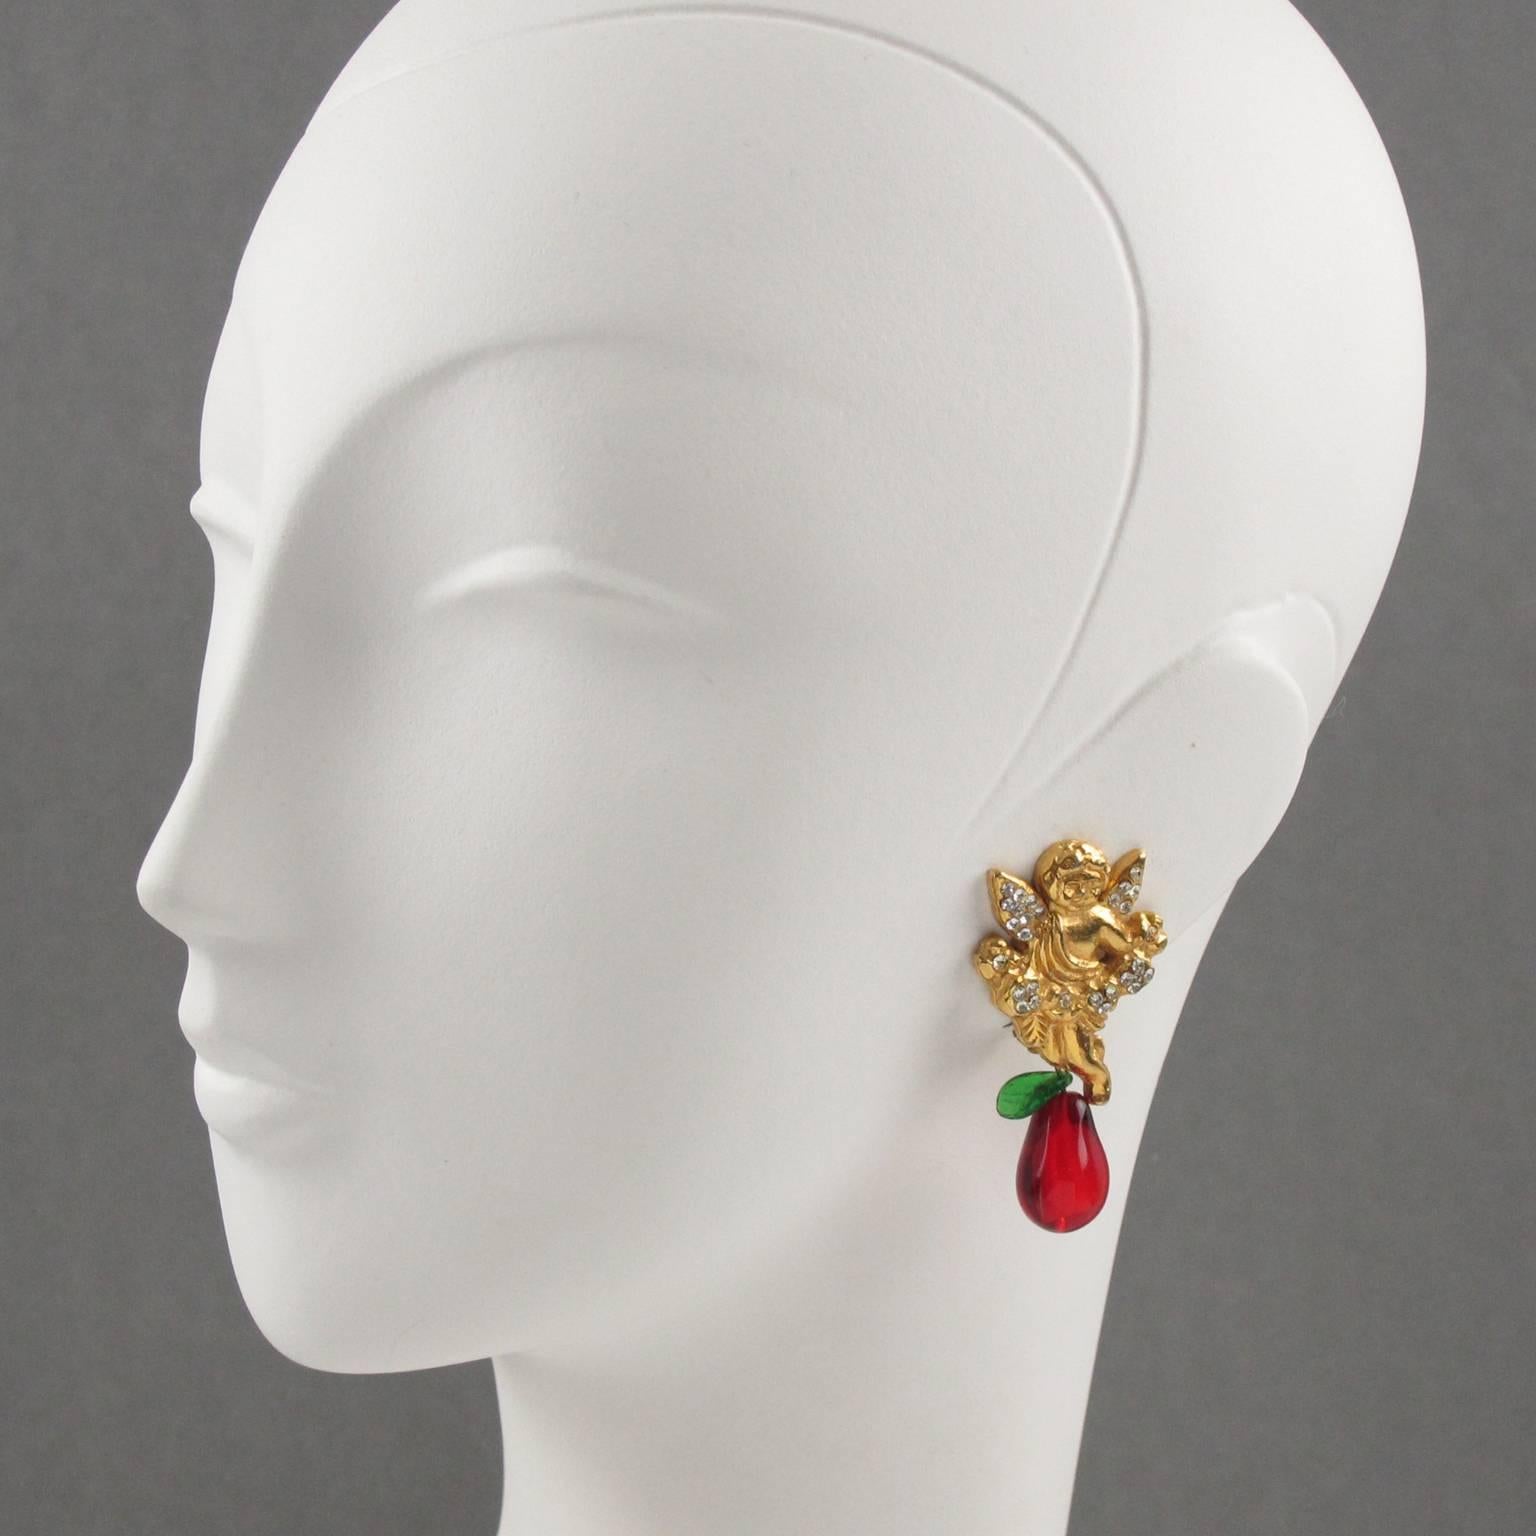 Lovely French fashion designer Sonia Rykiel Paris signed clip on earrings. Featuring gilt metal Cherub or Cupid ornate with clear rhinestones. Pear and leaf dangling charms in blown glass with red and green colors. Signed underside: Sonia Rykiel -